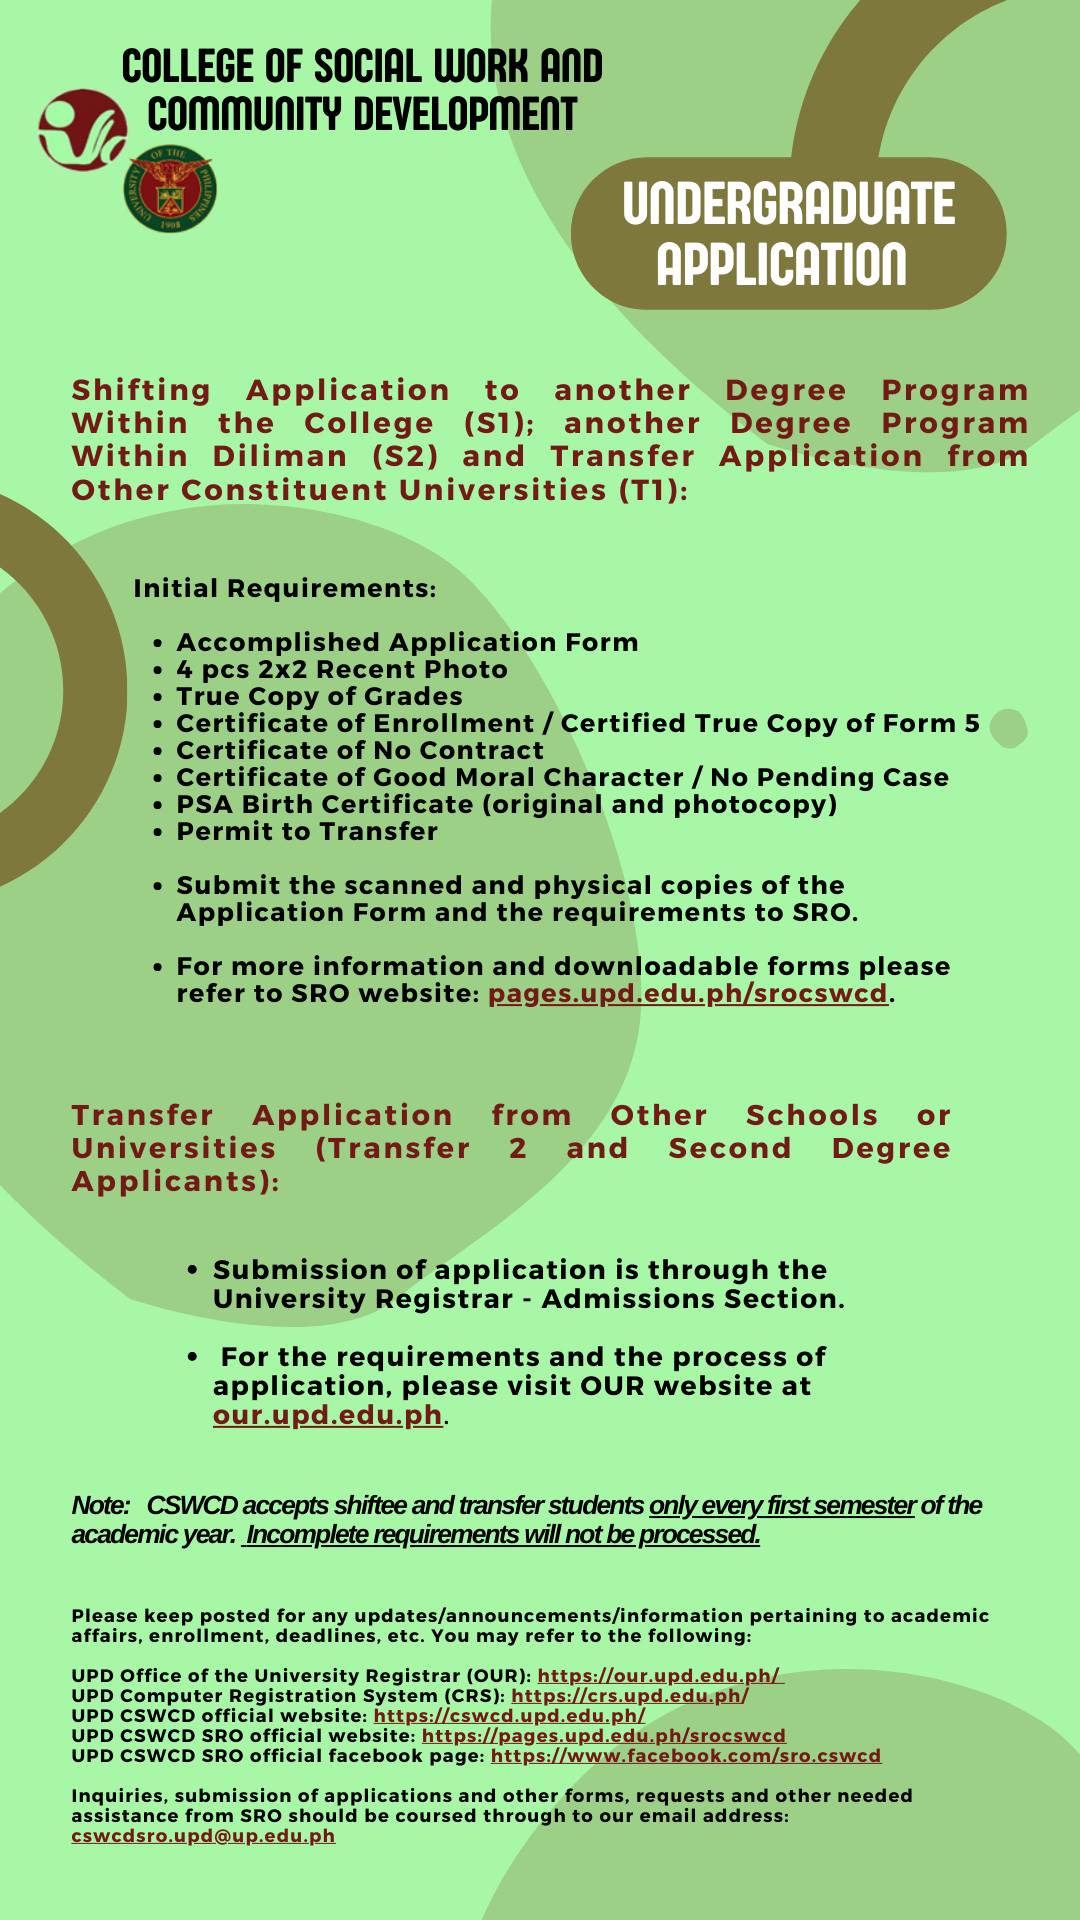 CSWCD PubMat for Submission of Undergraduate Applications